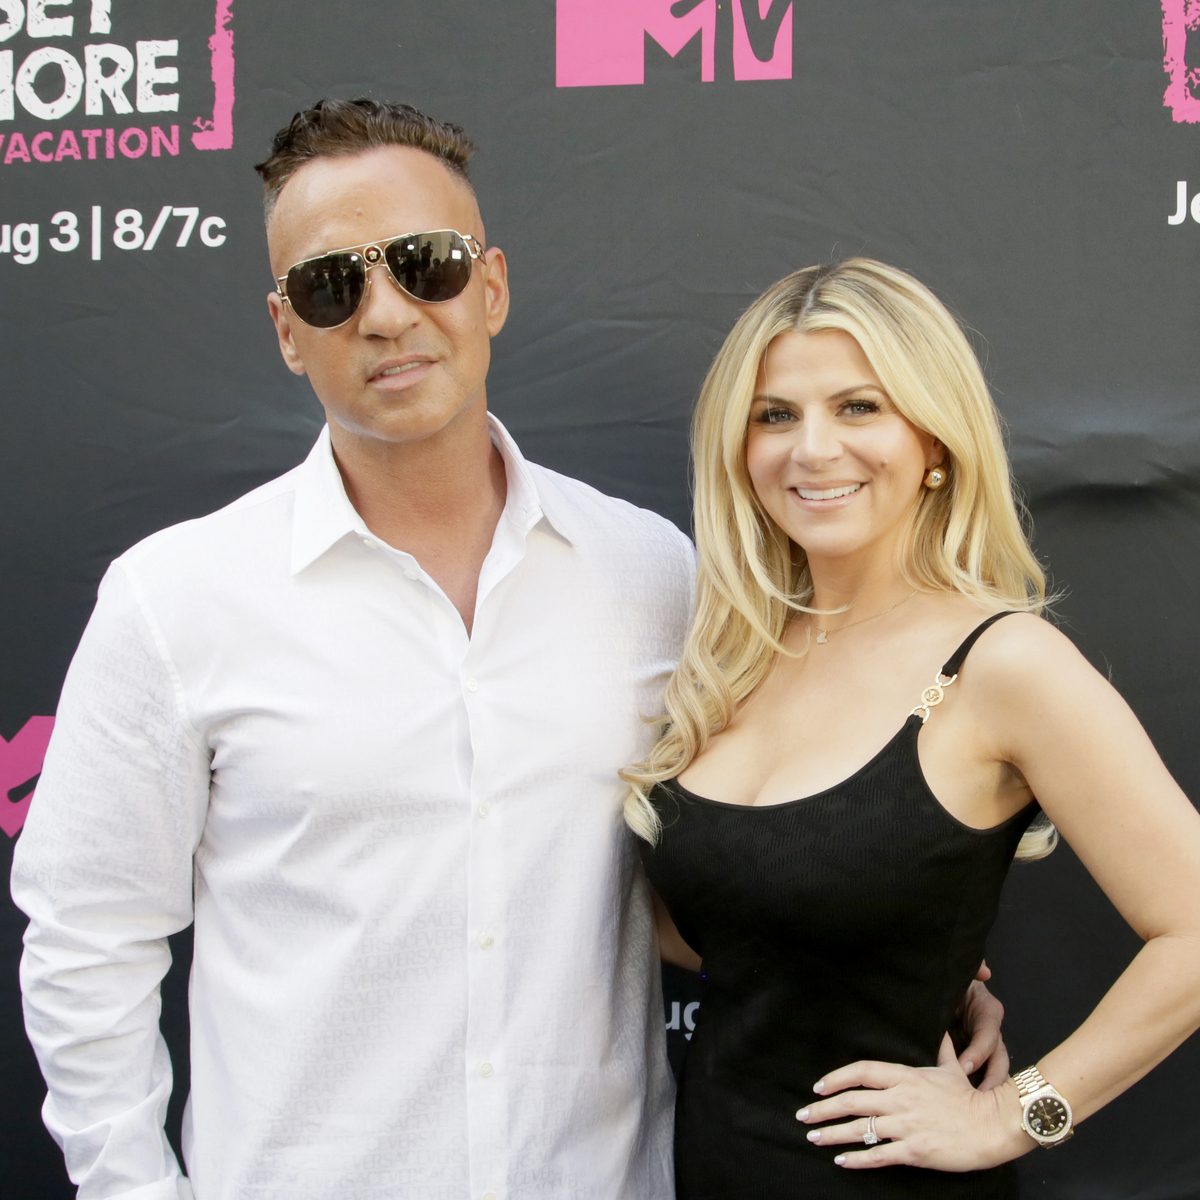 Mike “The Situation” Sorrentino & Wife Lauren Expecting Baby No. 3